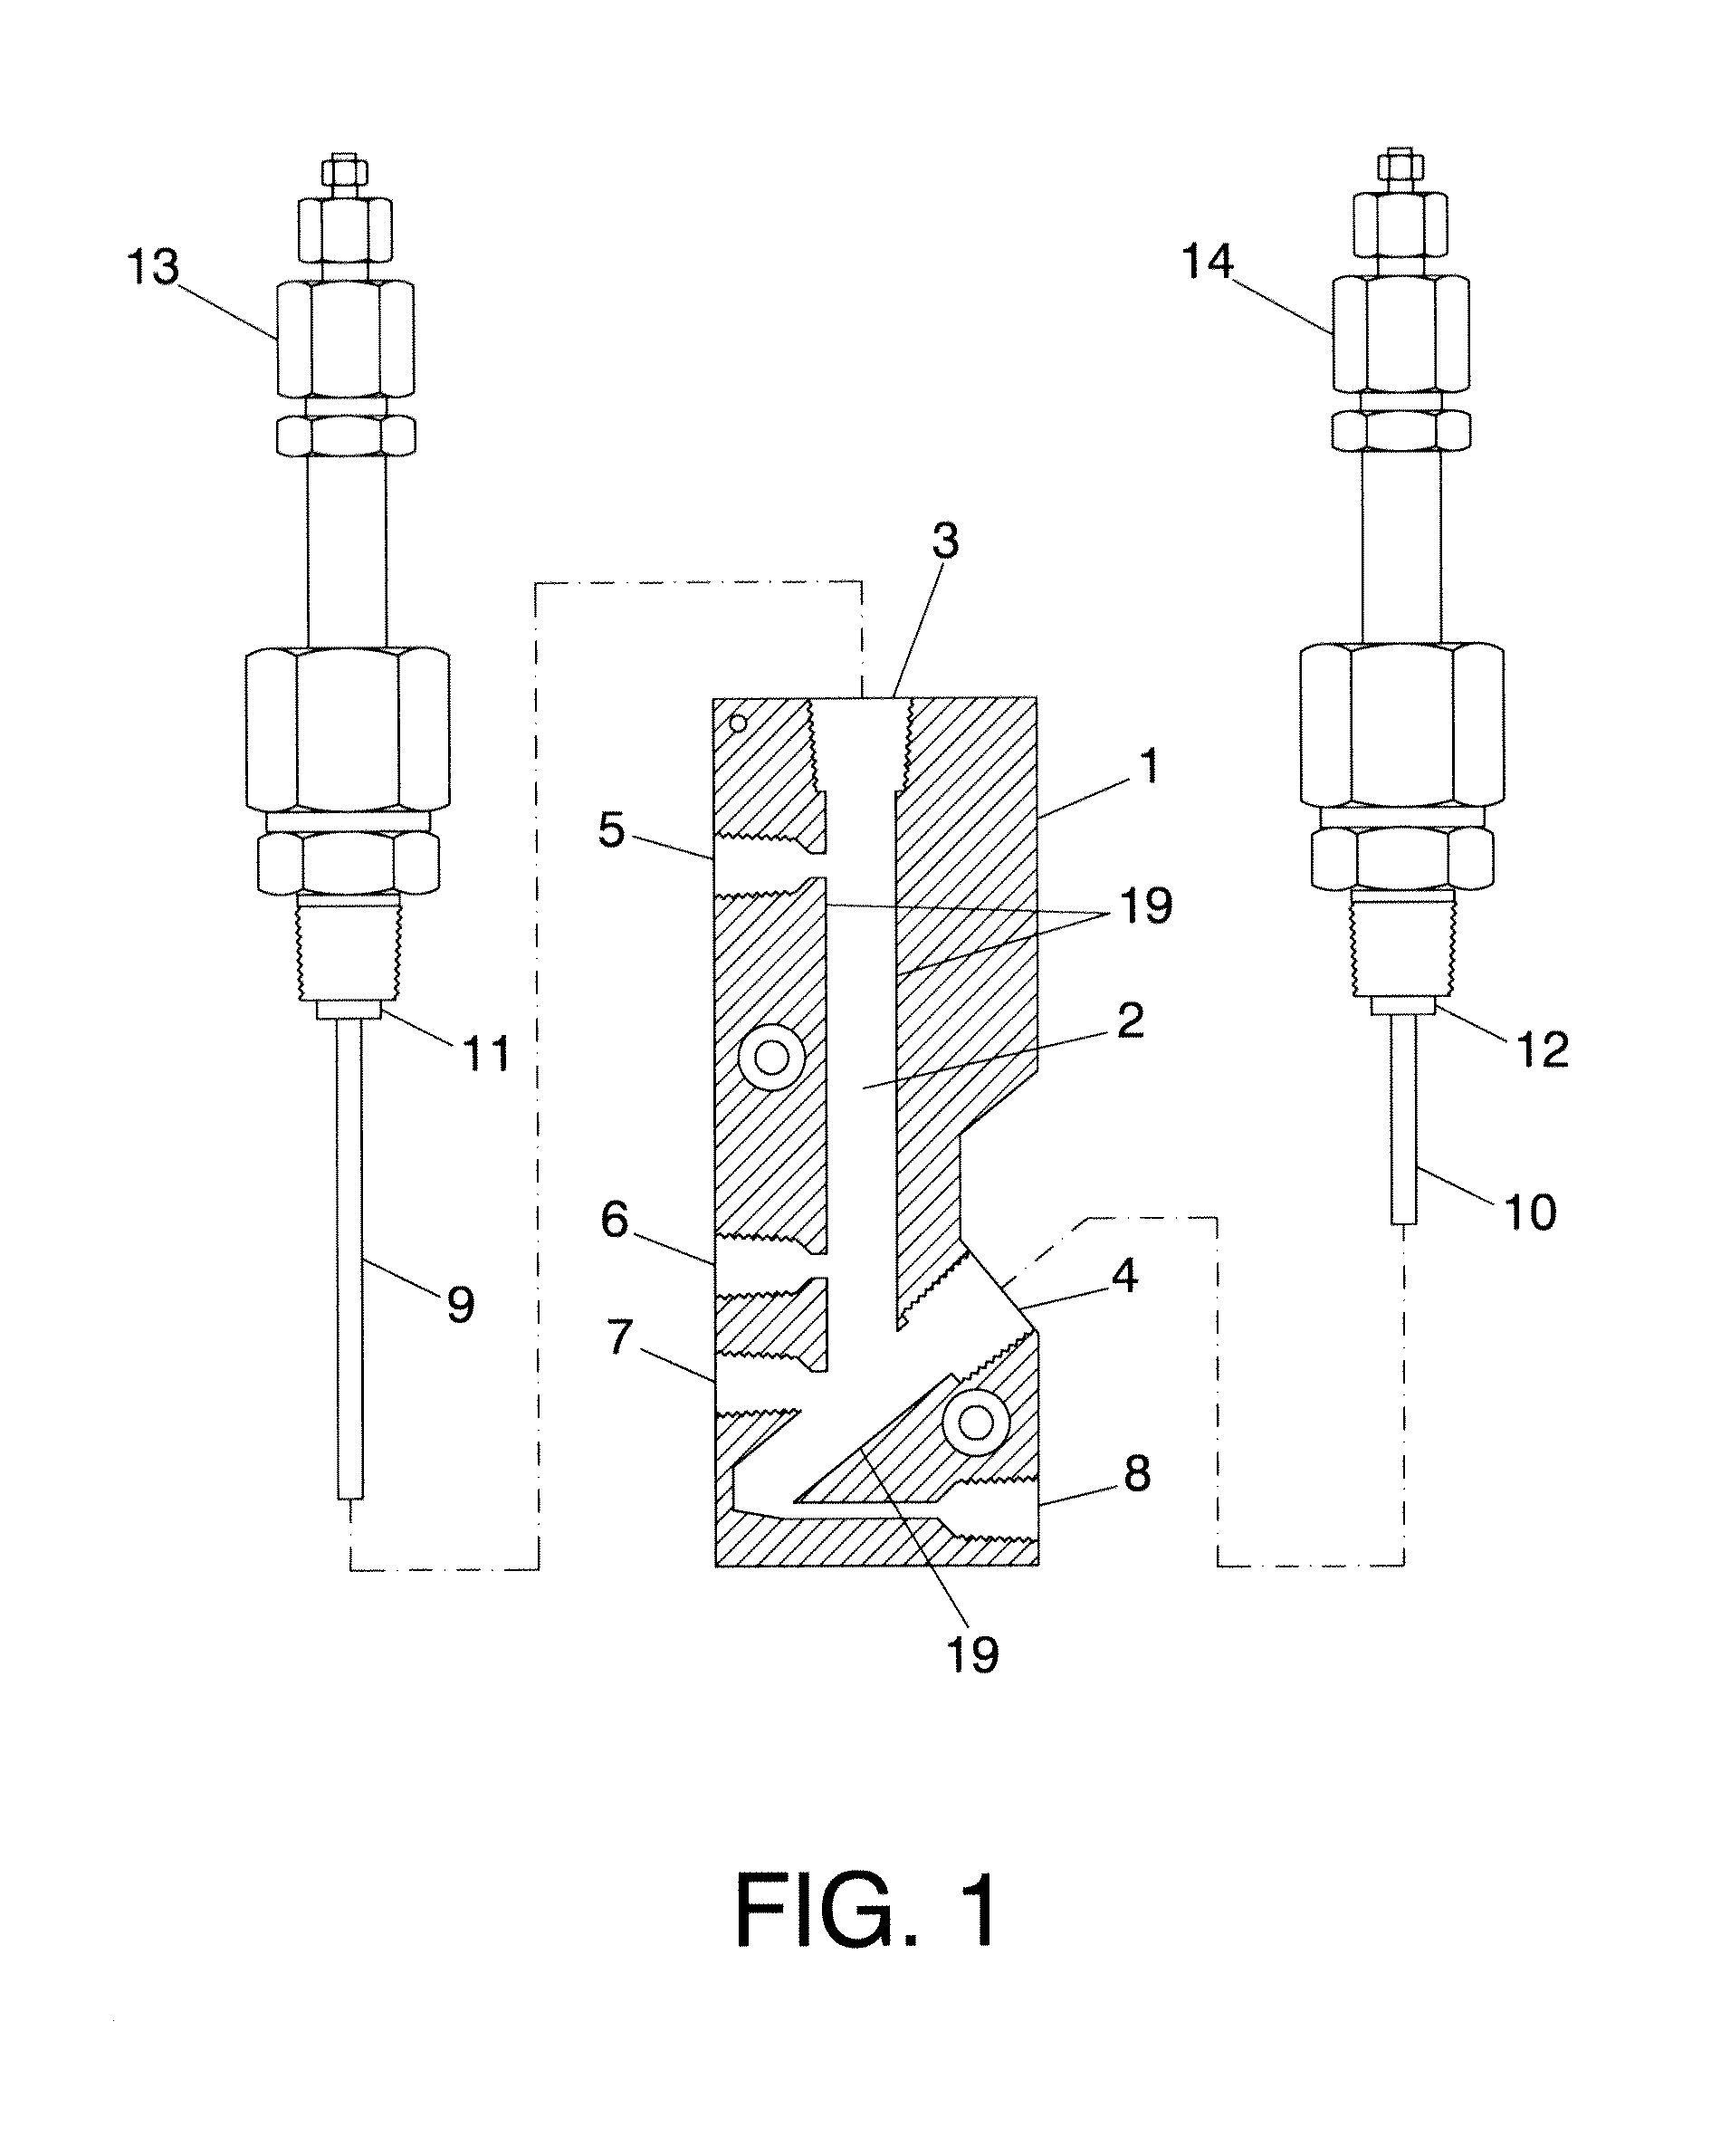 Capacitive separator device